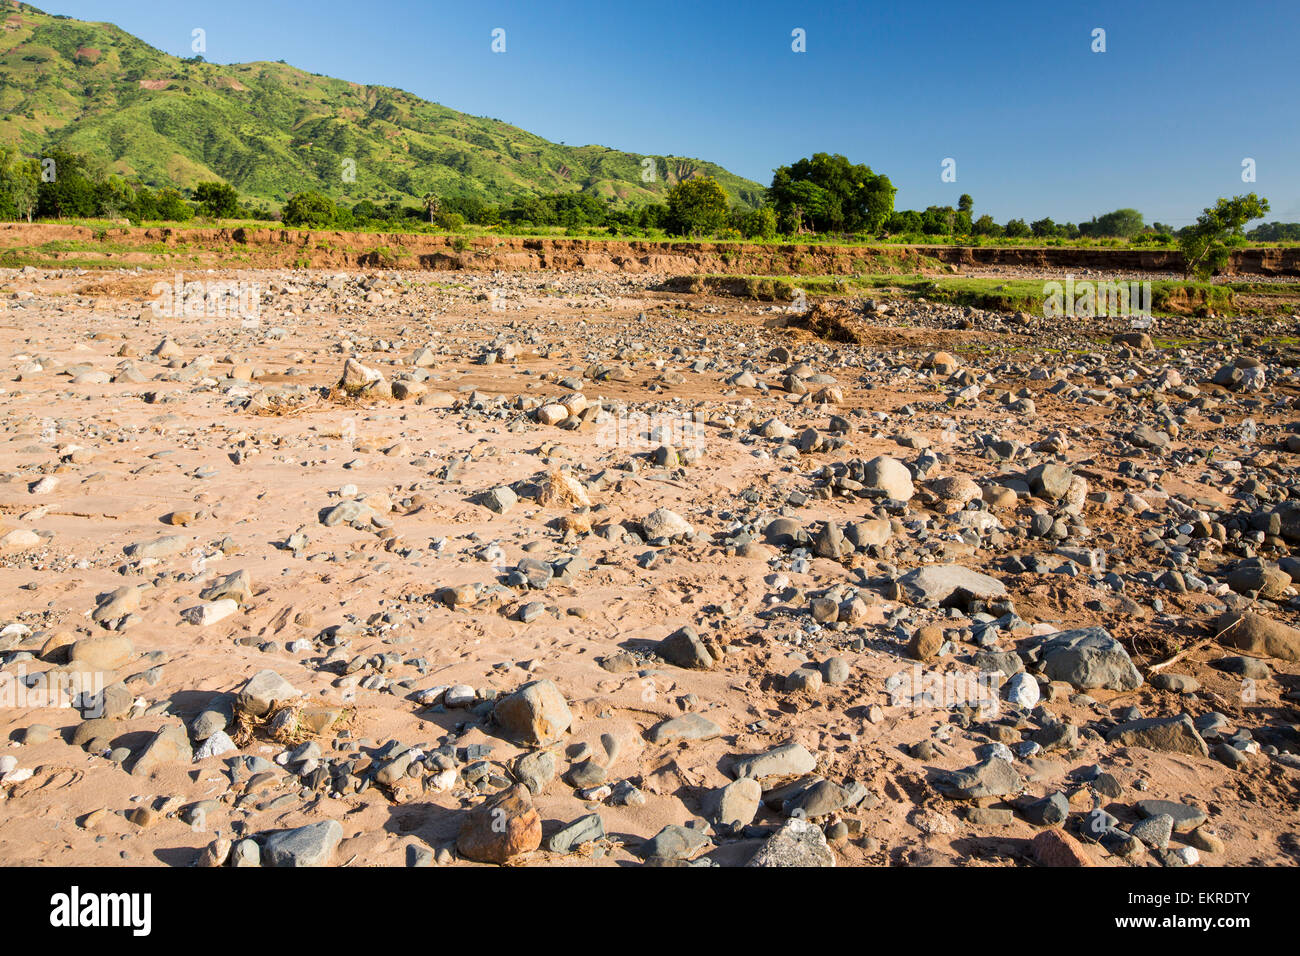 In mid January 2015, a three day period of excessive rain brought unprecedented floods to the small poor African country of Malawi. It displaced nearly quarter of a million people, devastated 64,000 hectares of land, and killed several hundred people. This shot shows flood damage near Chikwawa. Stock Photo